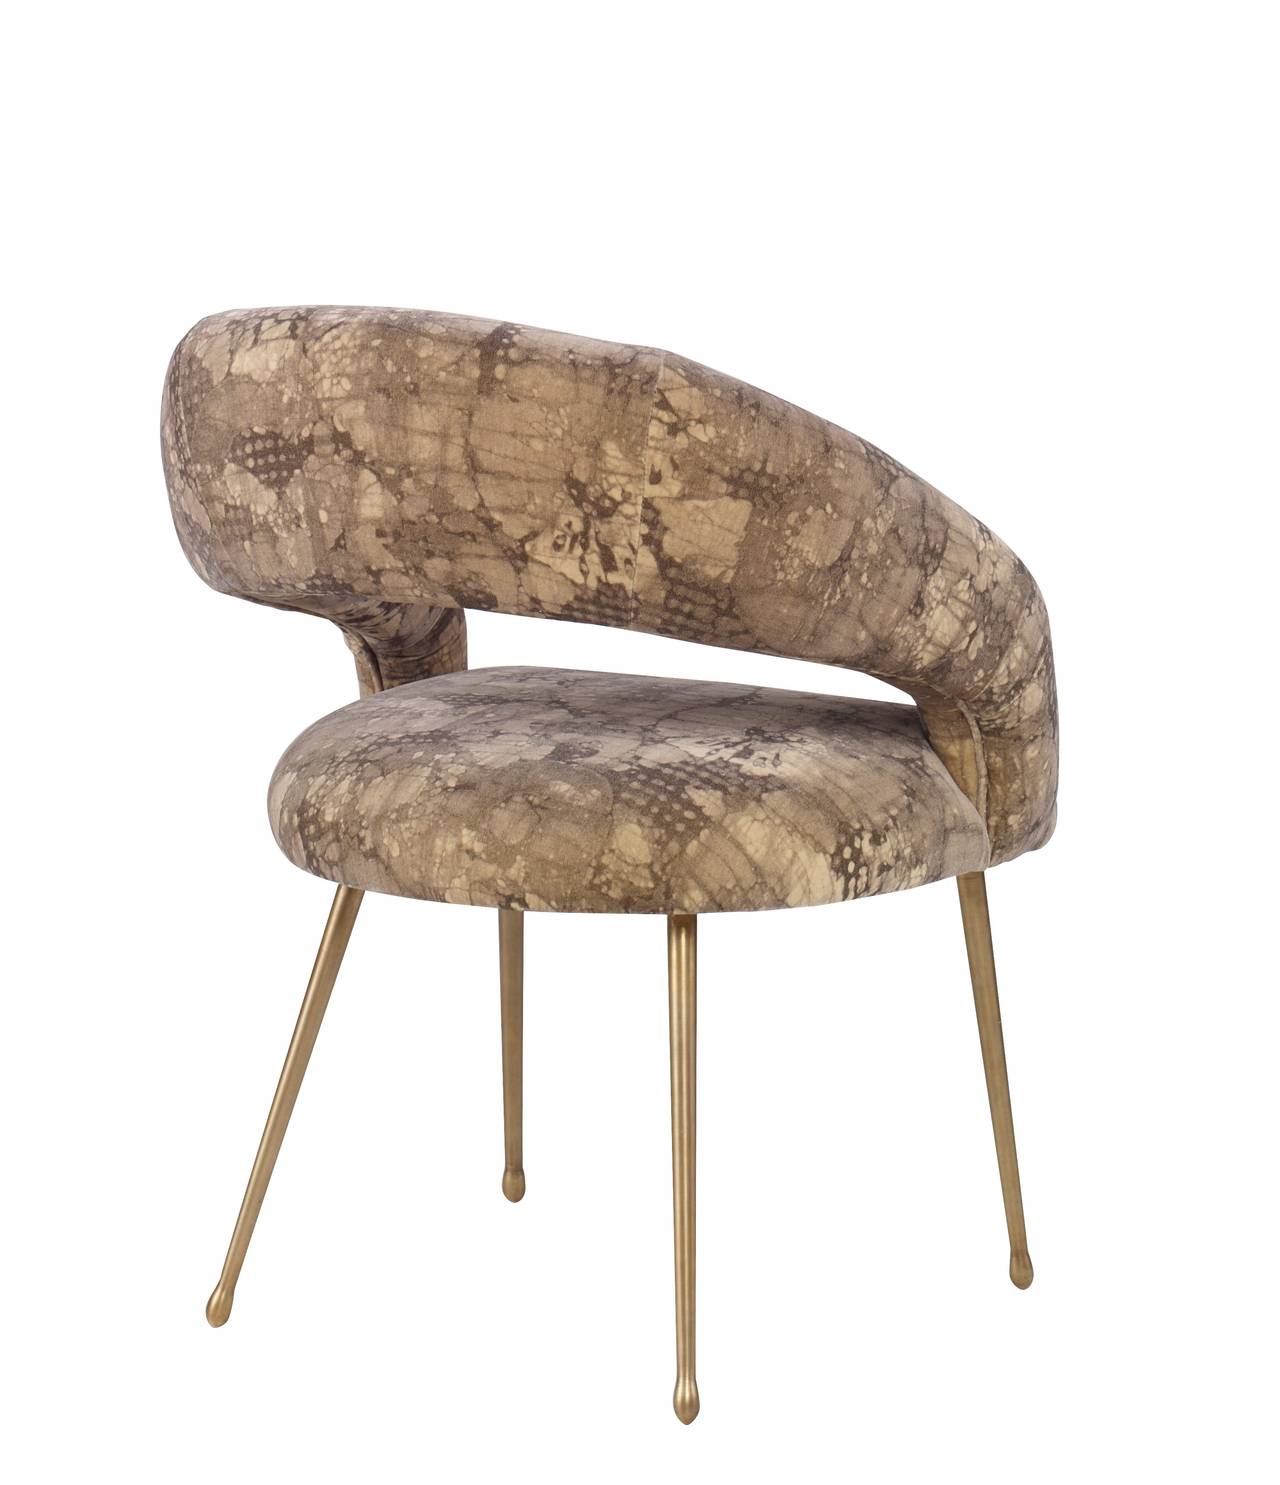 Inspired by Kelly Wearstler’s signature soufflé chair shape, the Laurel Chair features a dramatic swooping, curved back, tight upholstered seat, and exposed back. It rests on on cast brass legs in burnished bronze with an elegant, teardrop foot.